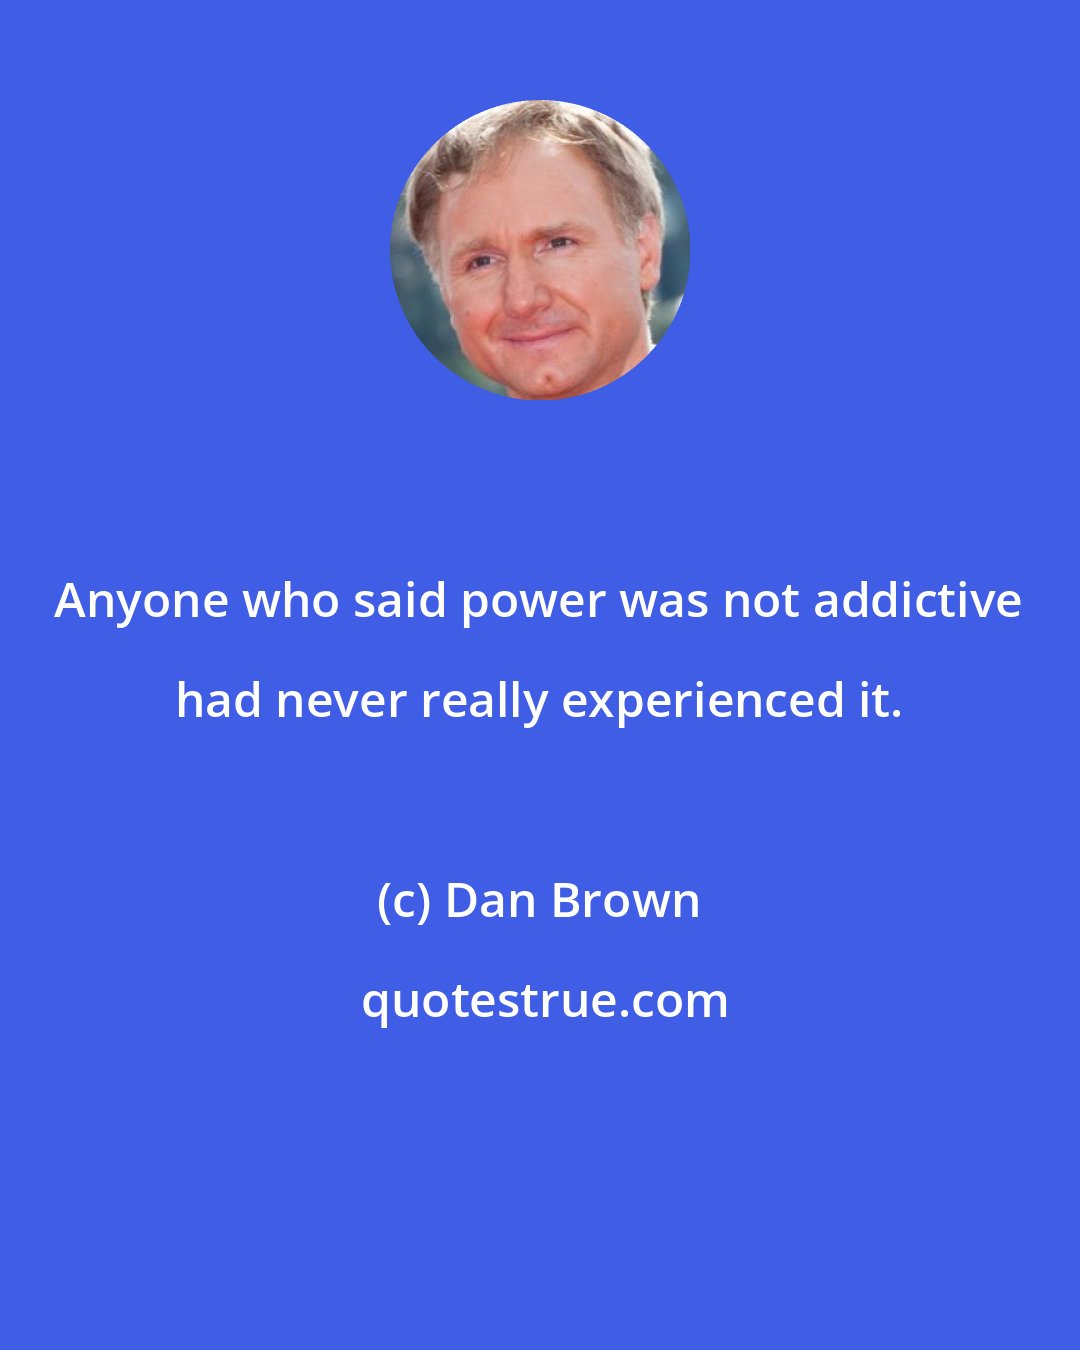 Dan Brown: Anyone who said power was not addictive had never really experienced it.